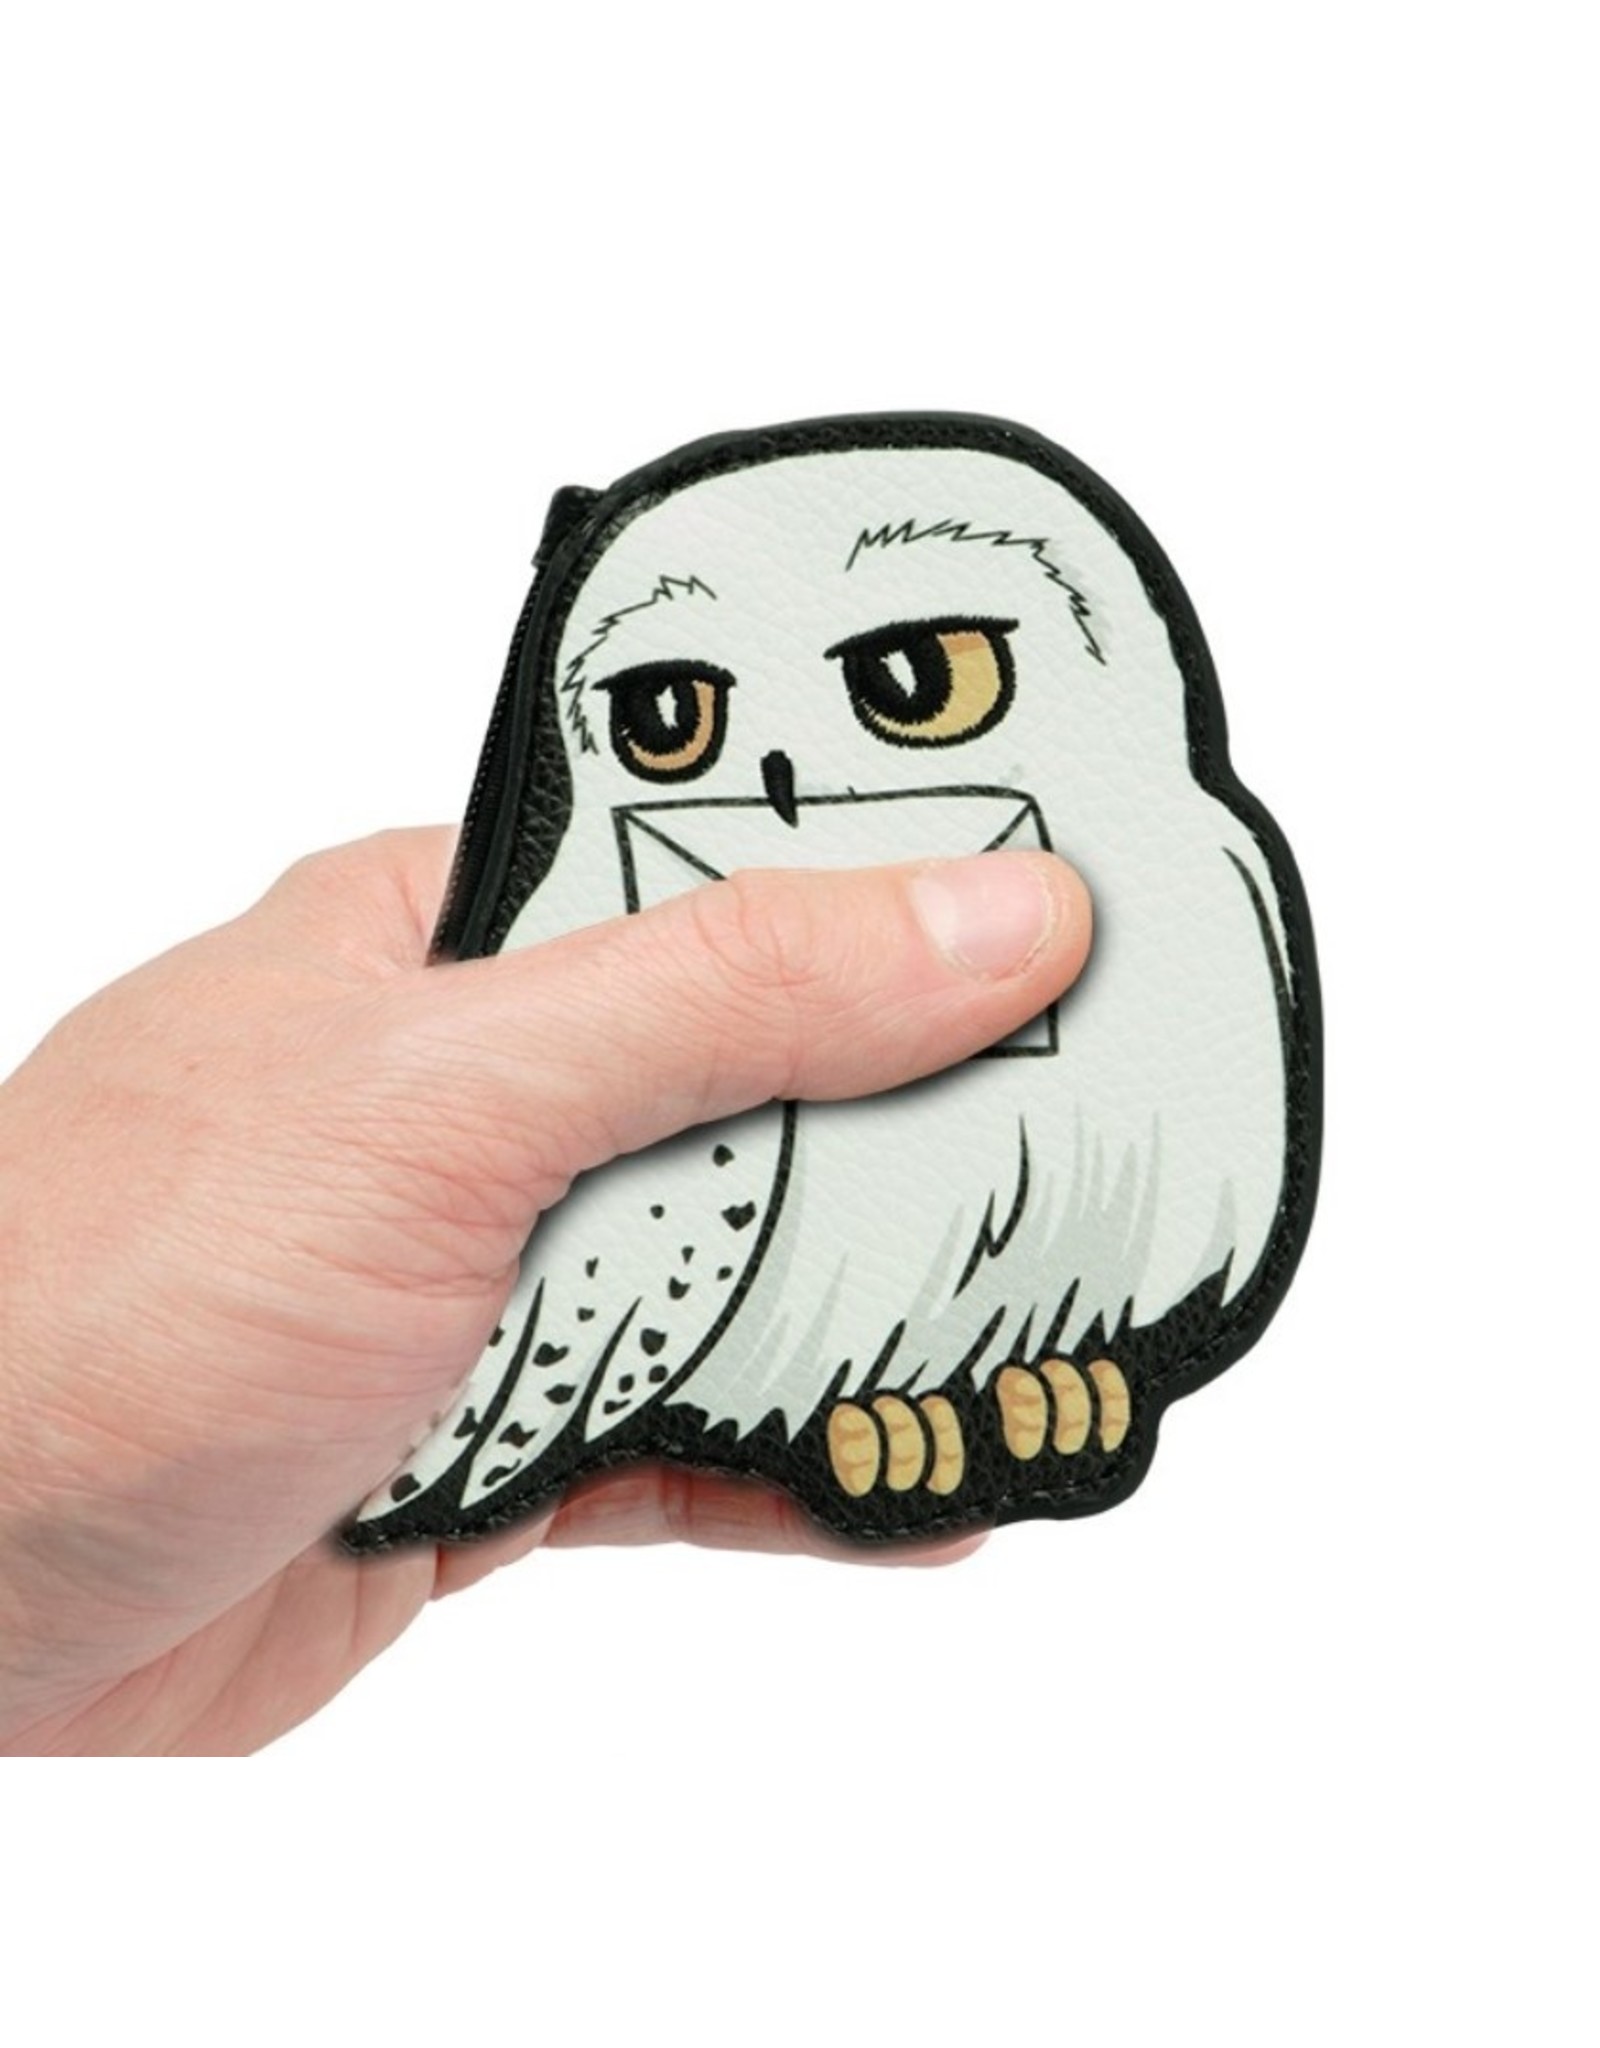 Harry Potter Merchandise wallets - Harry Potter Hedwig Coin Purse